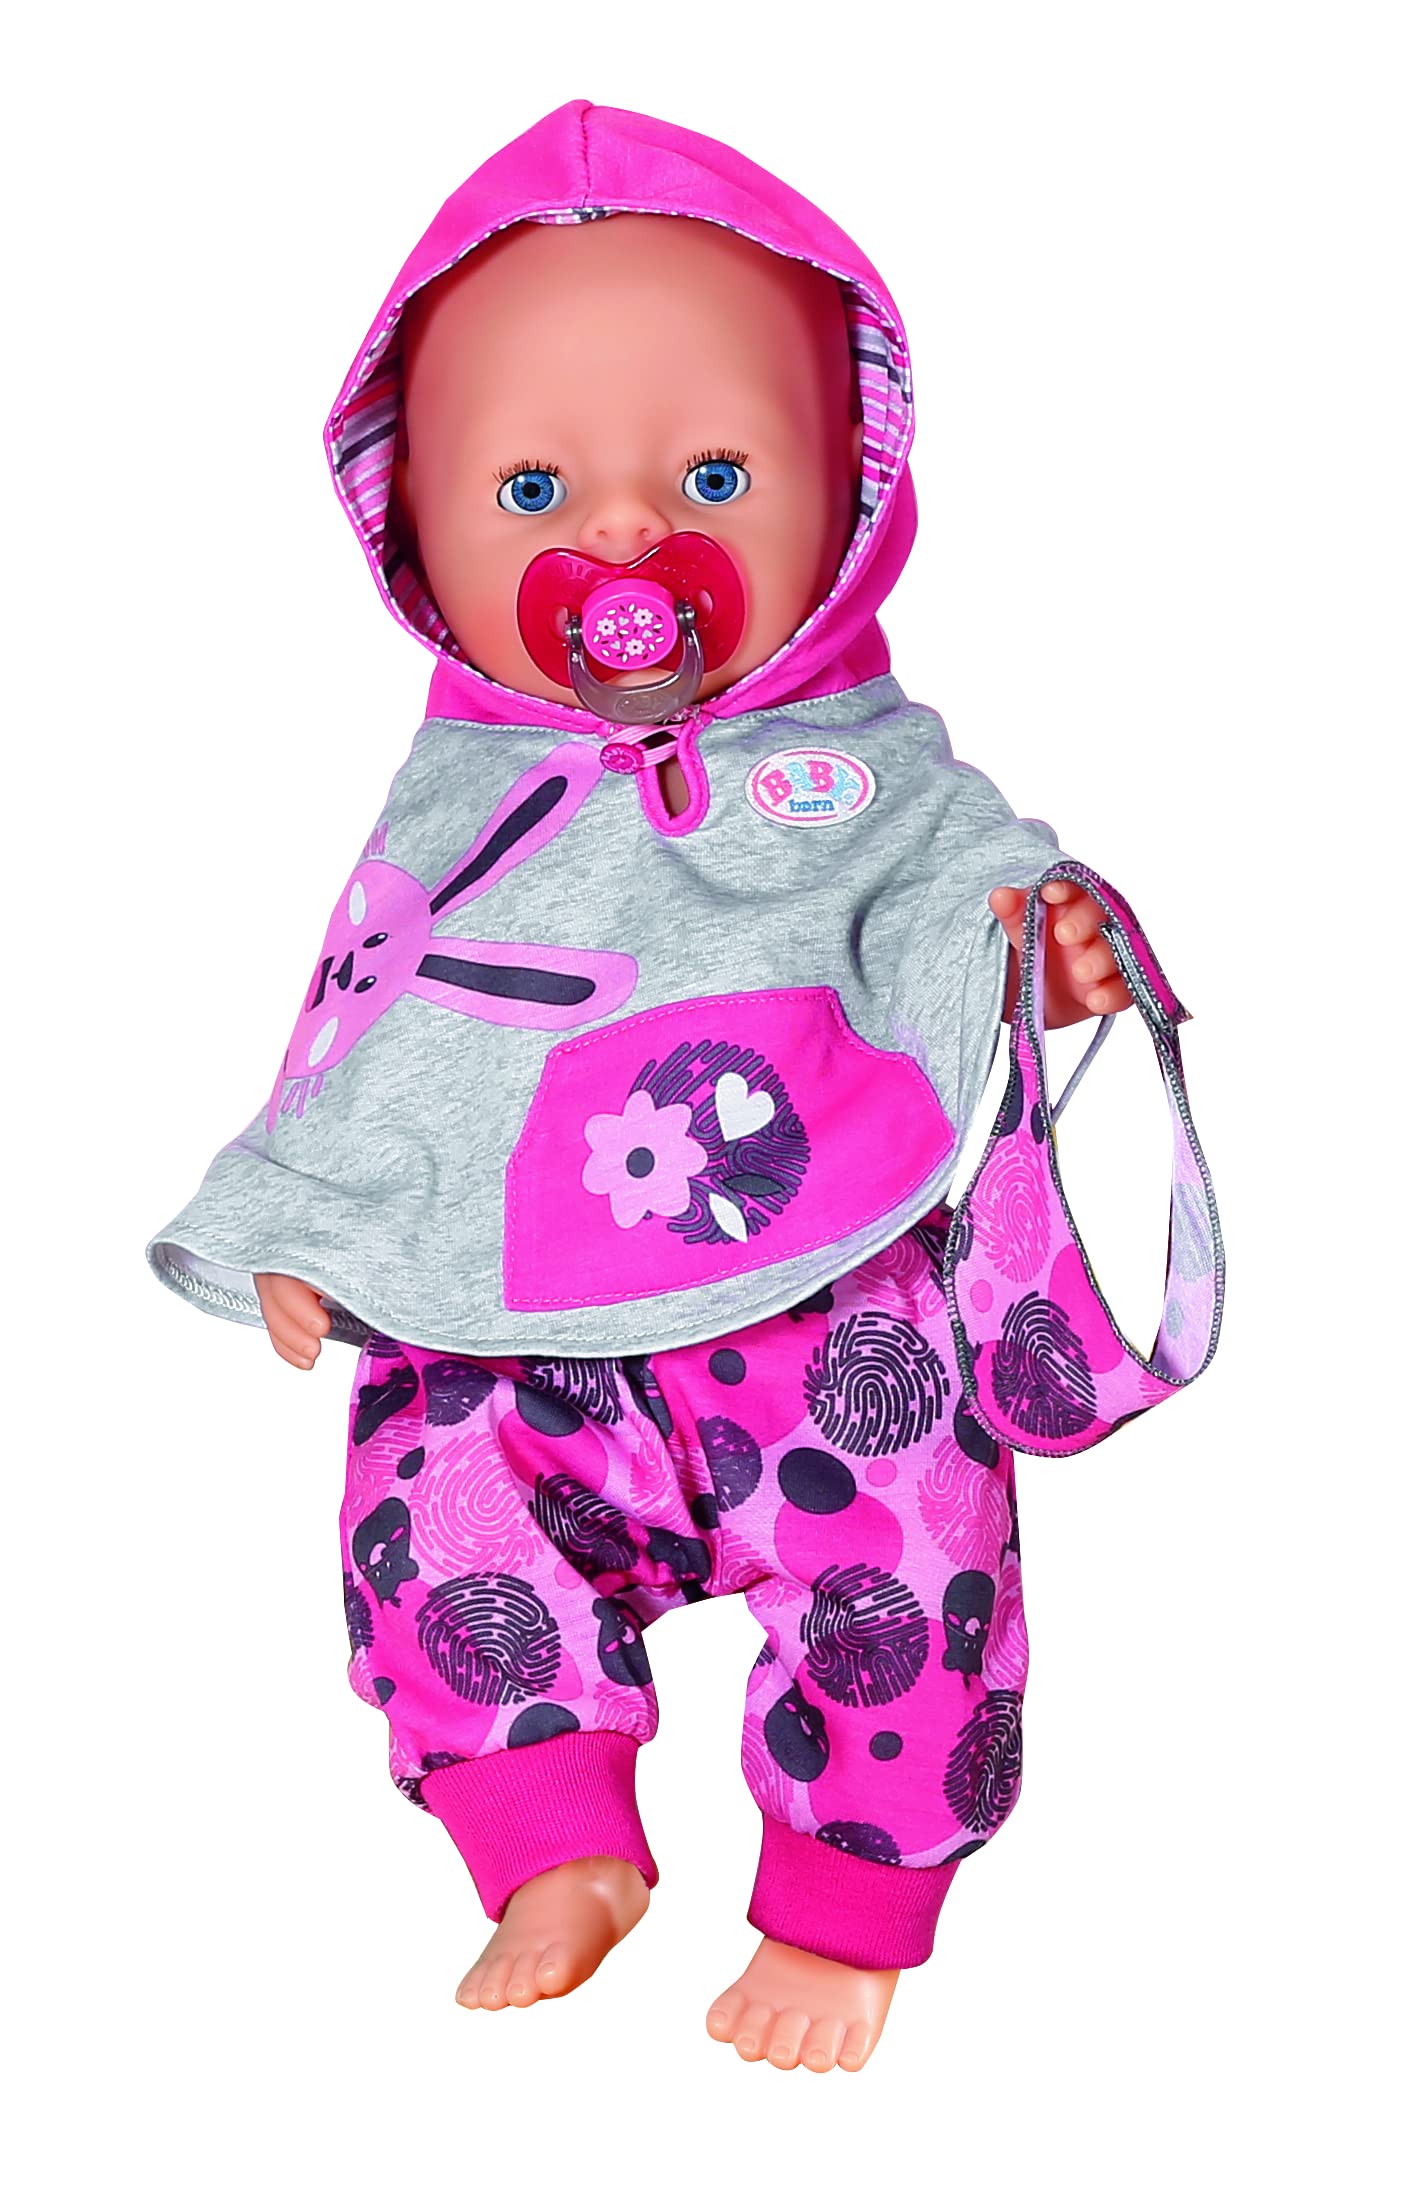 BABY born Deluxe First Arrival 832561 Clothing Accessories for 43cm Dolls for Toddlers - Includes 9-Piece Clothing Set & Dummy Eye Function - Suitable from 3 Years